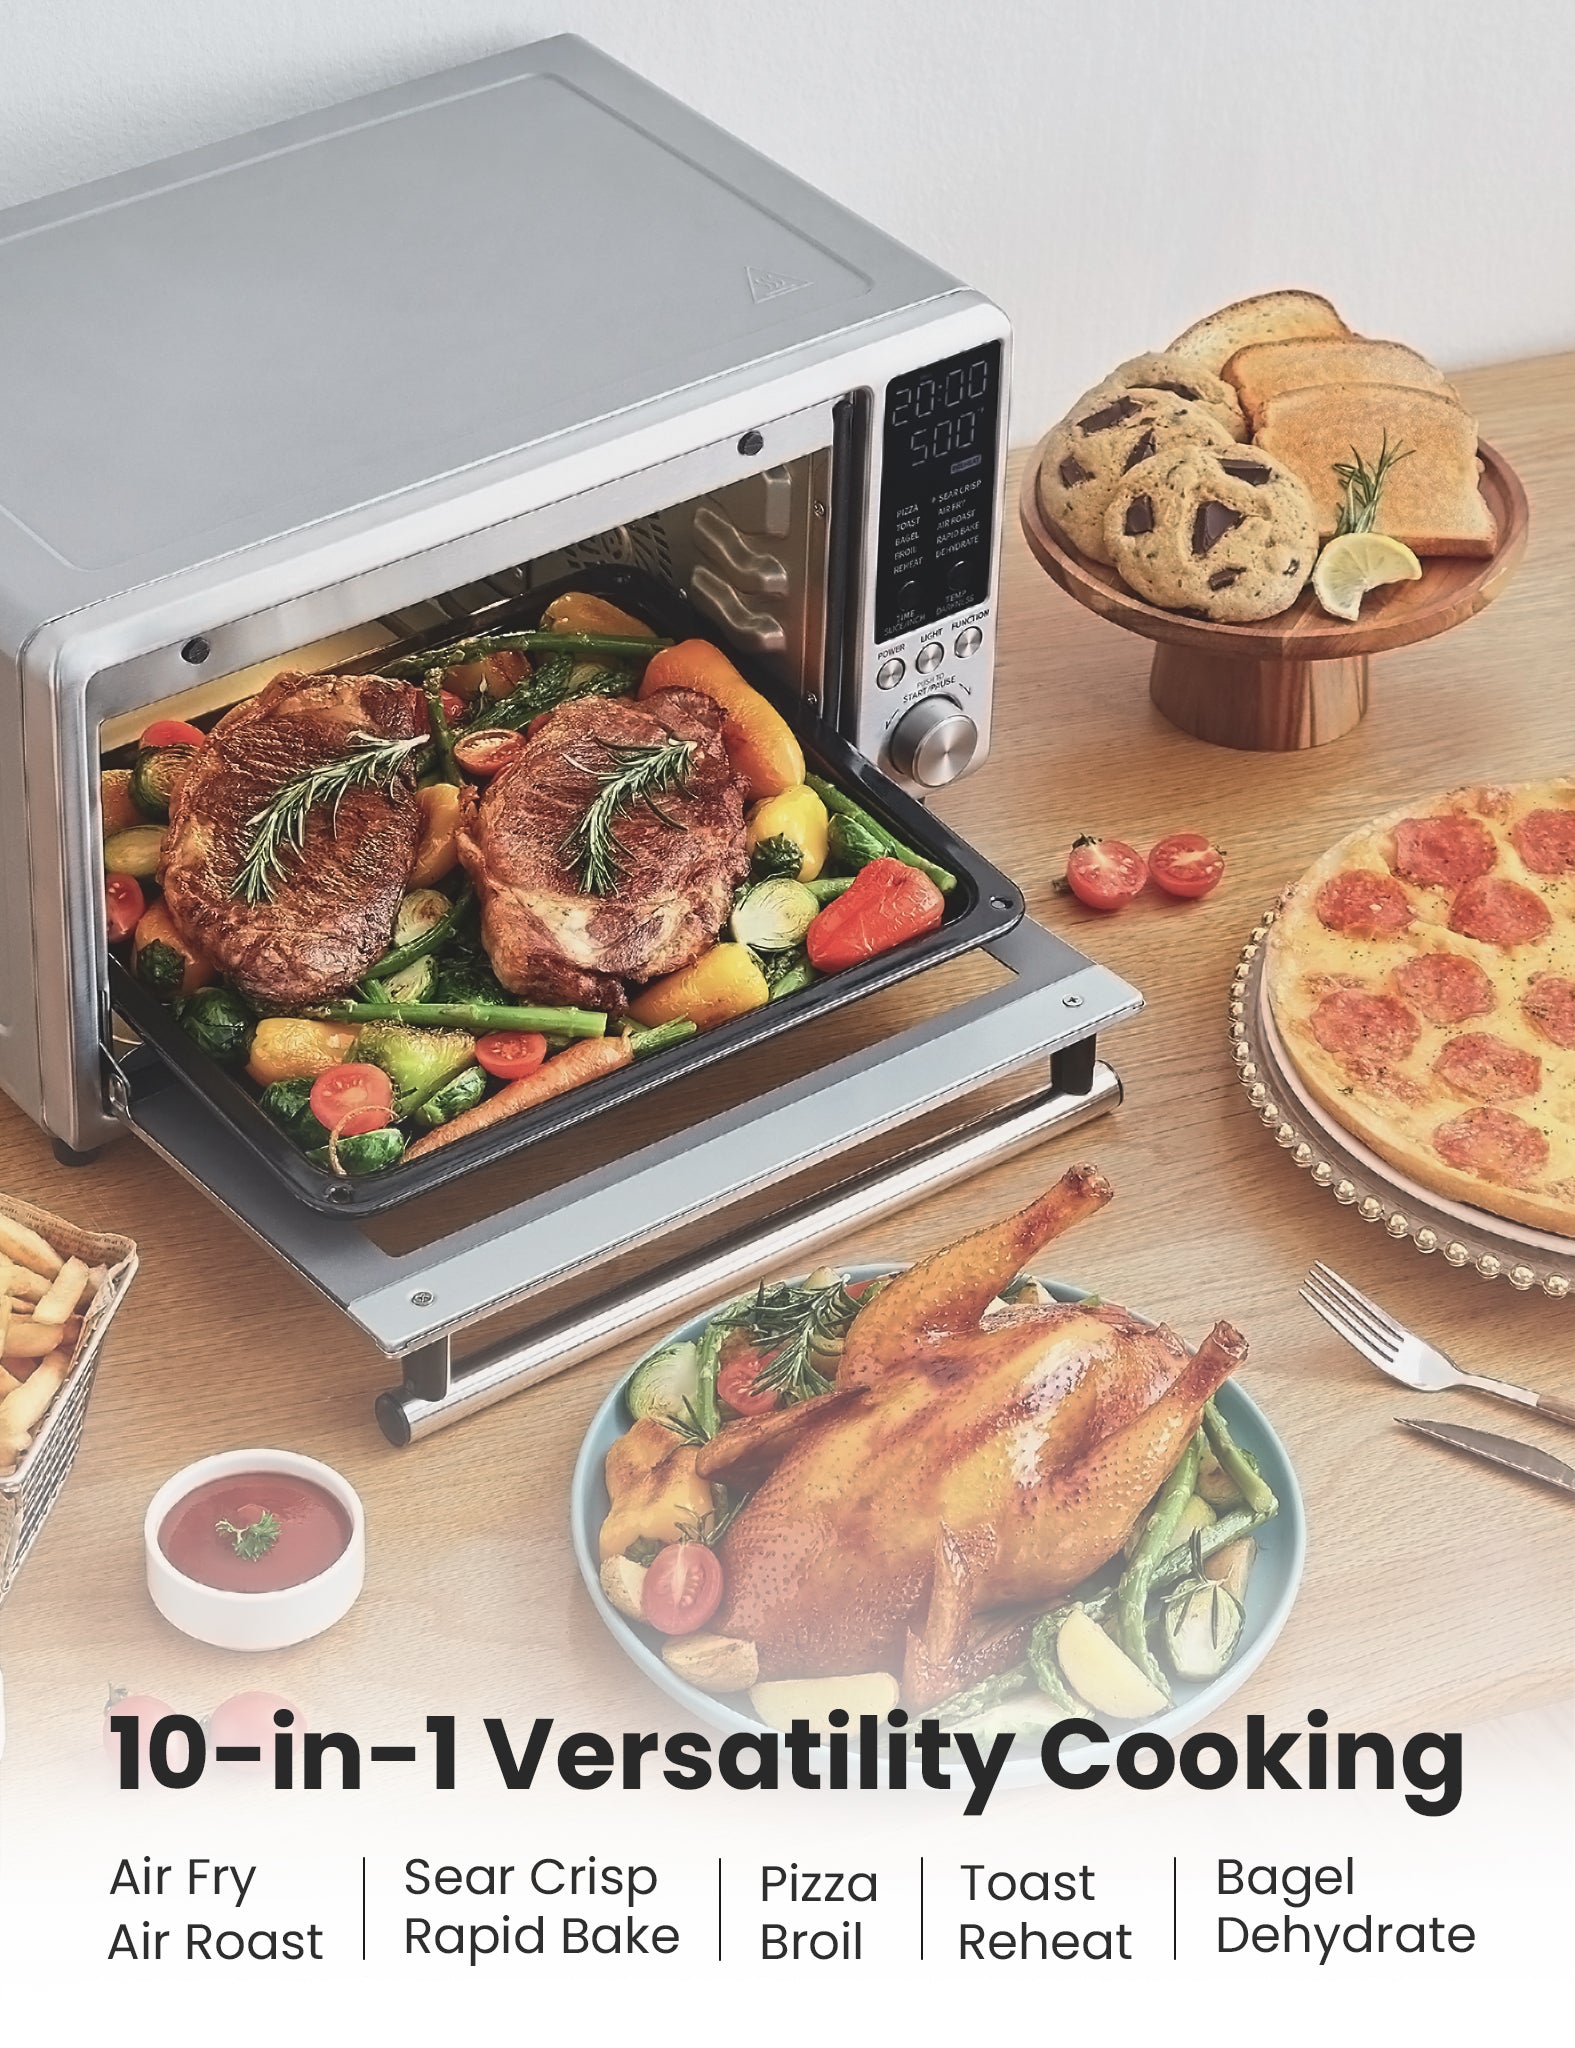 There are two steaks and vegetables in the air fryer toaster oven which is surrounded by different foods